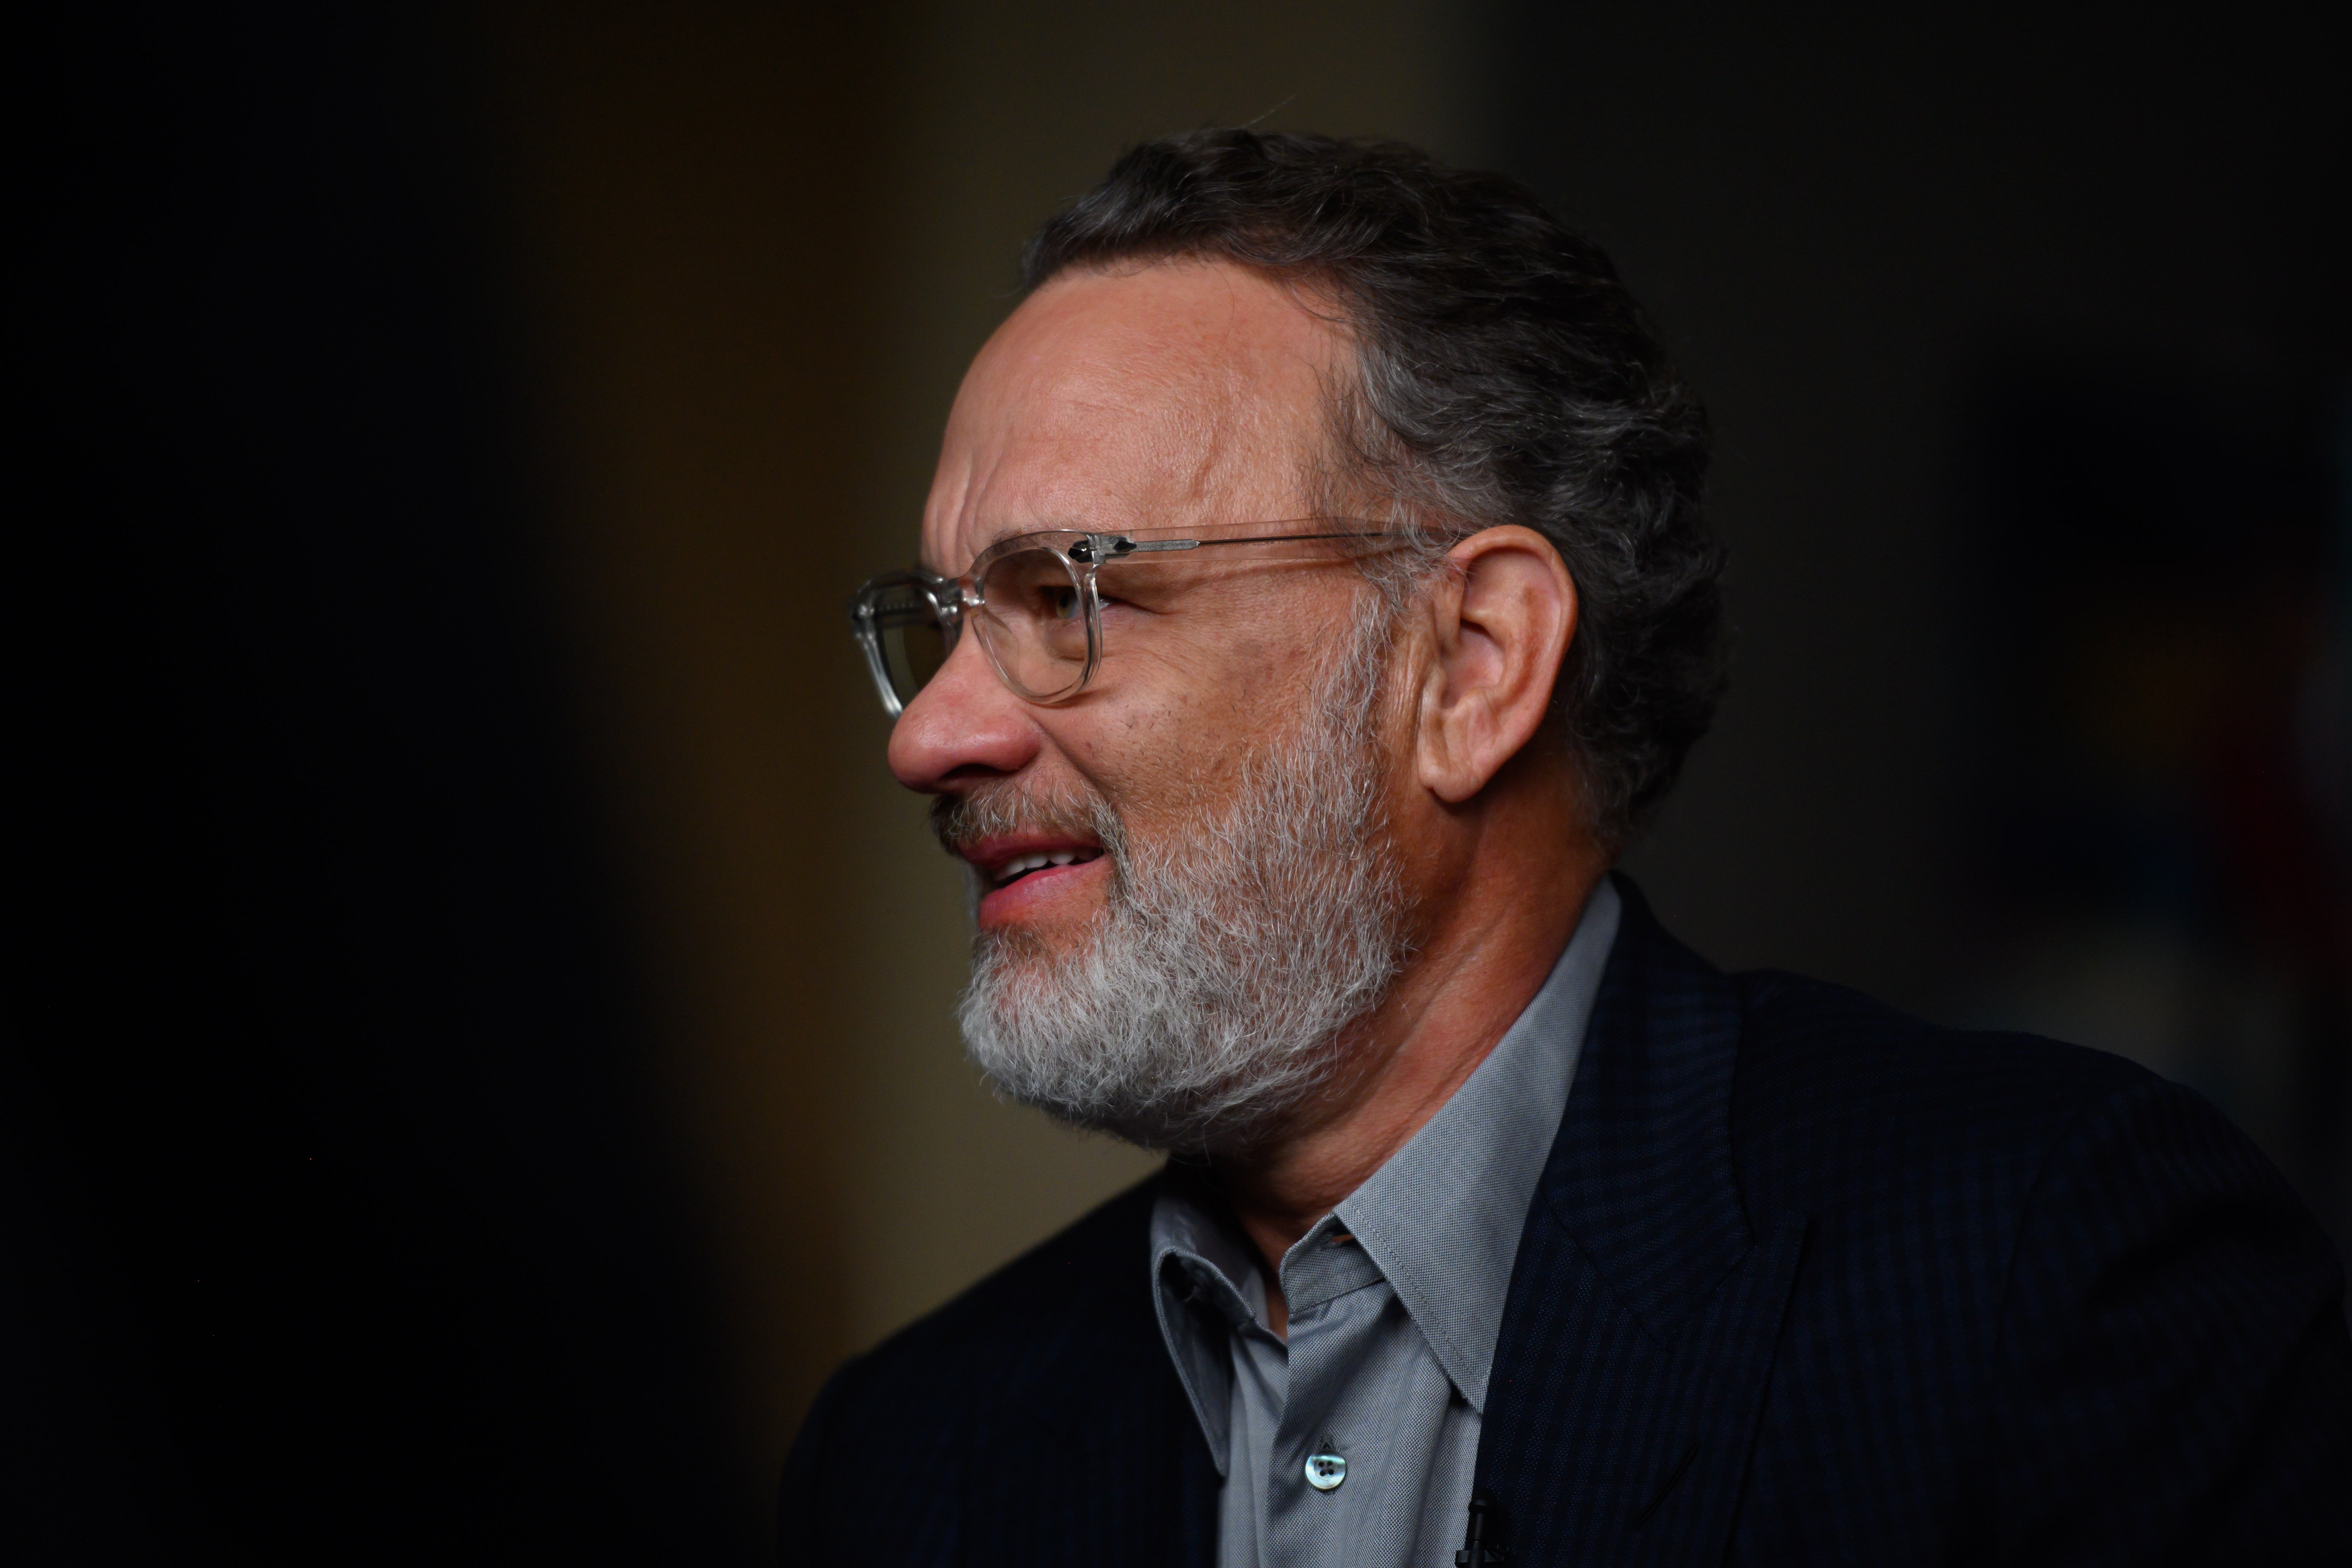 Tom Hanks with a beard wearing glasses